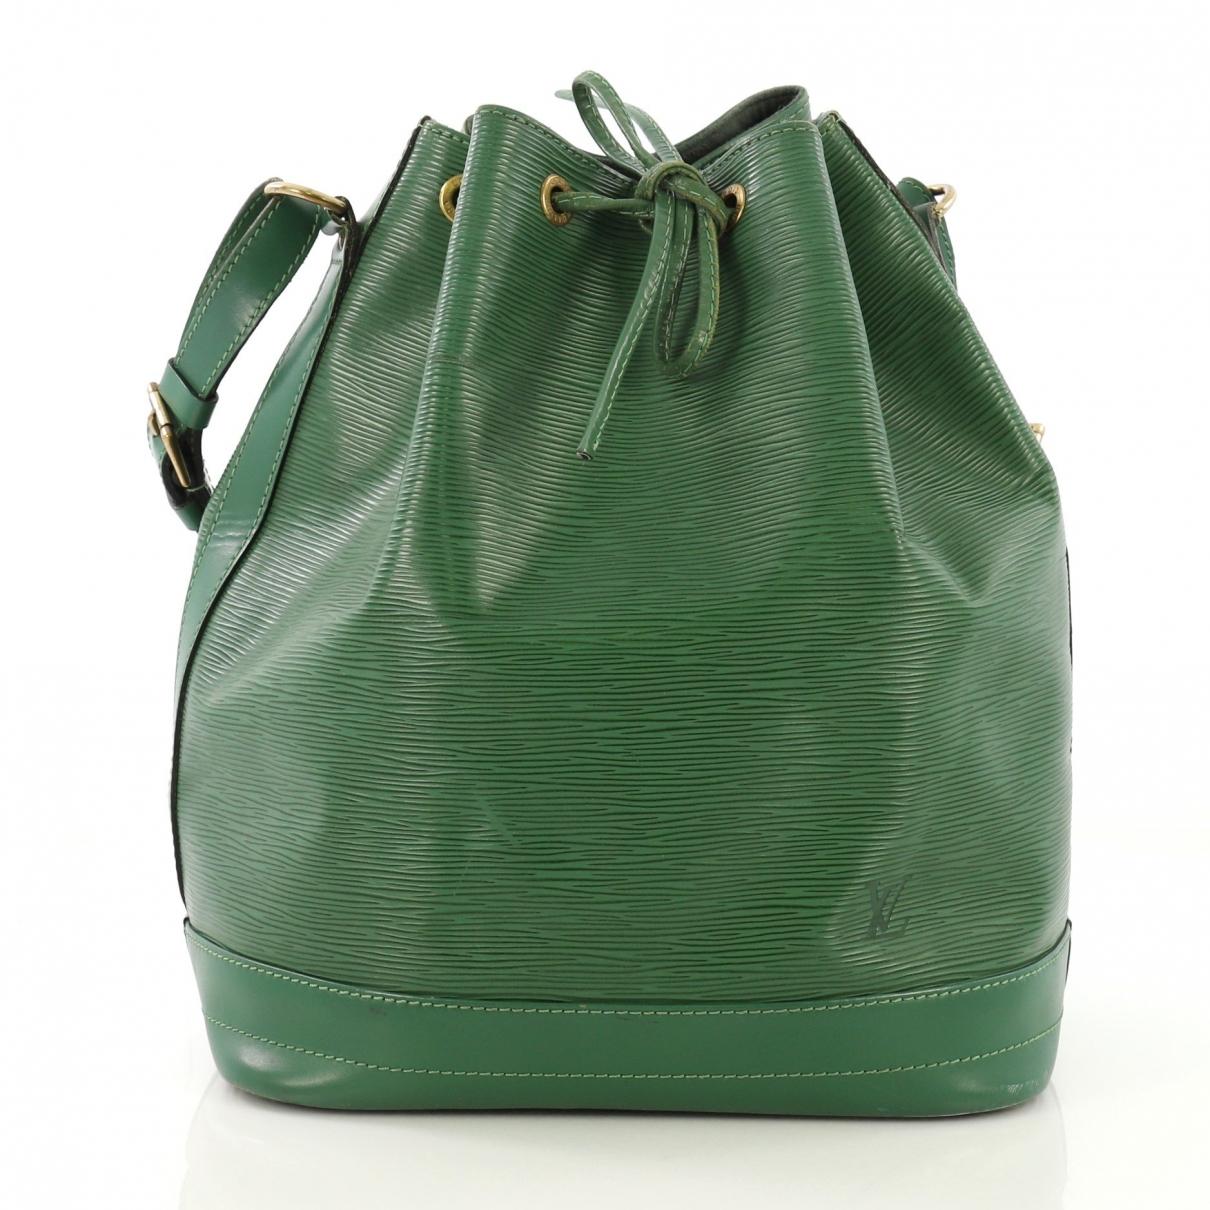 Louis Vuitton Noé Green Leather Handbag in Green - Save 18% - Lyst